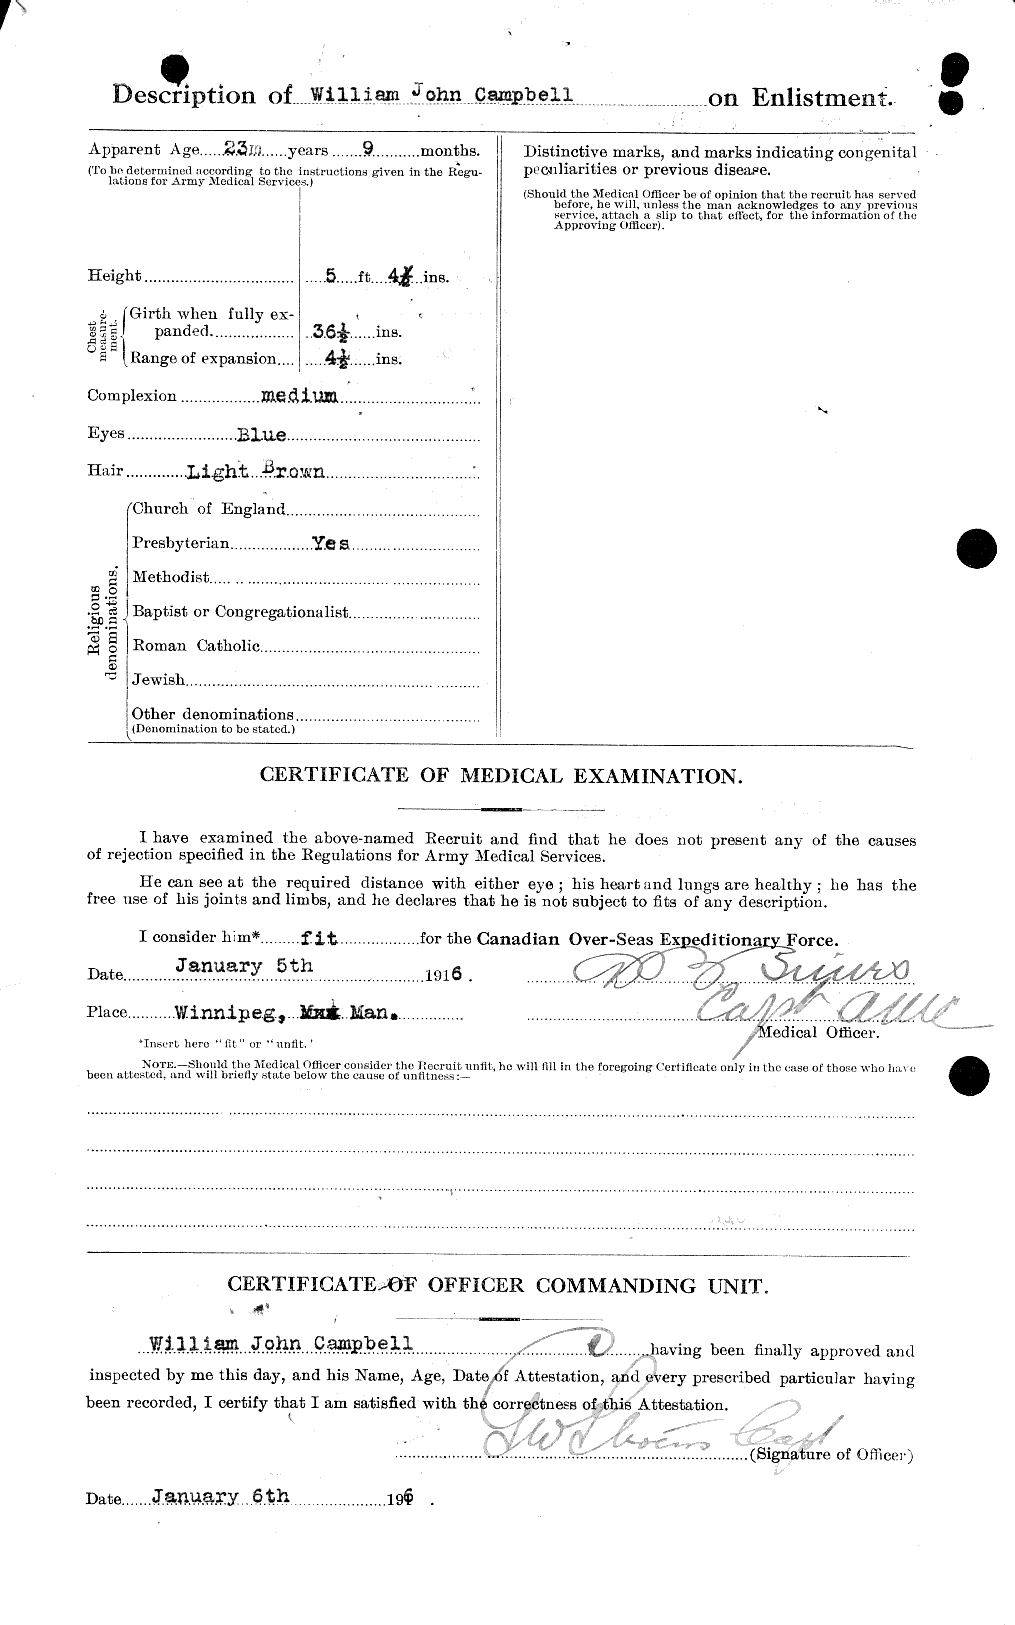 Personnel Records of the First World War - CEF 008699b